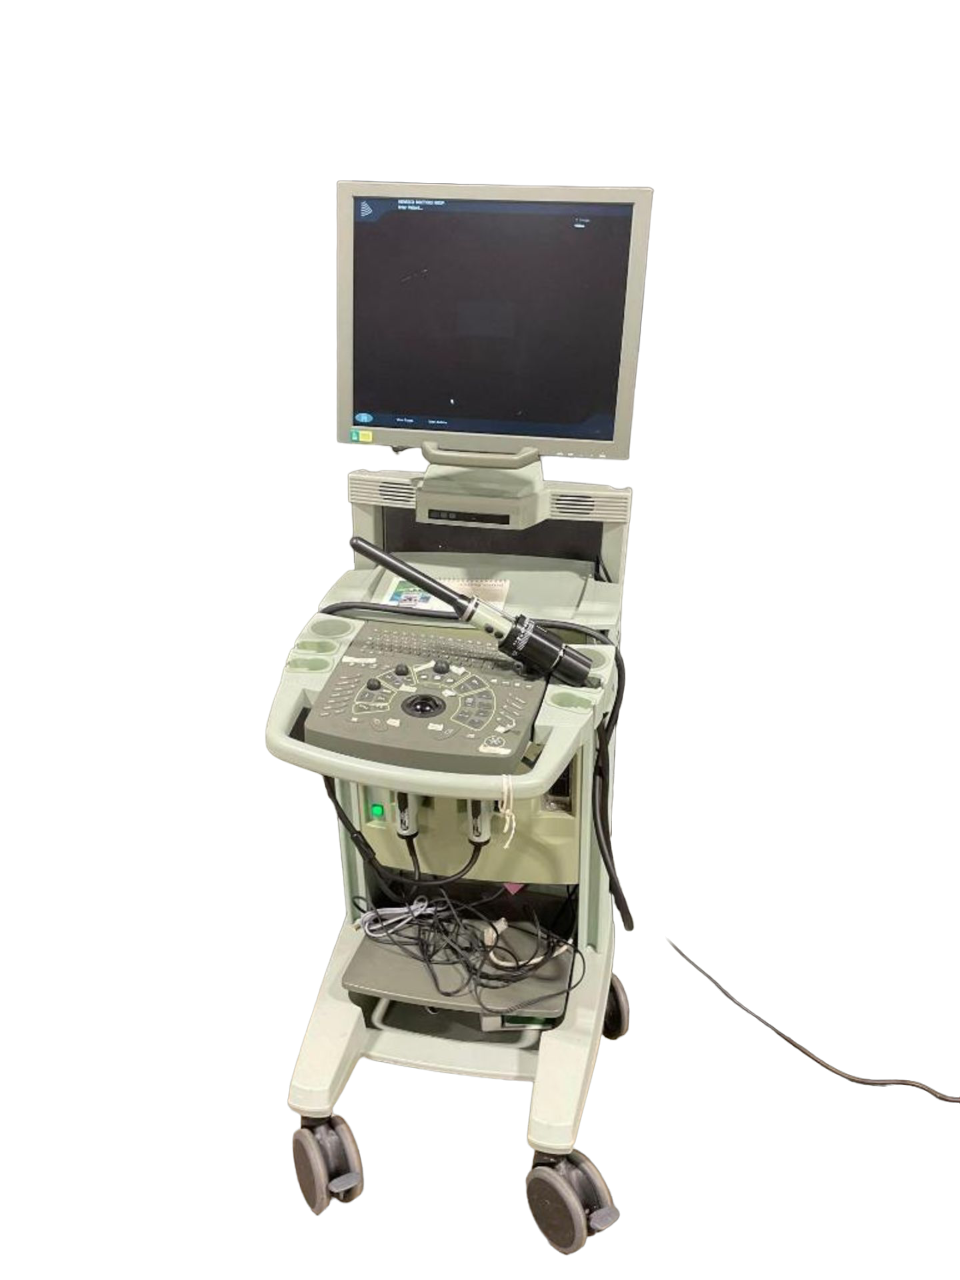 Pro Focus 500 BK Medical Ultrasound Machine With One Probe  8658T/8658S DIAGNOSTIC ULTRASOUND MACHINES FOR SALE